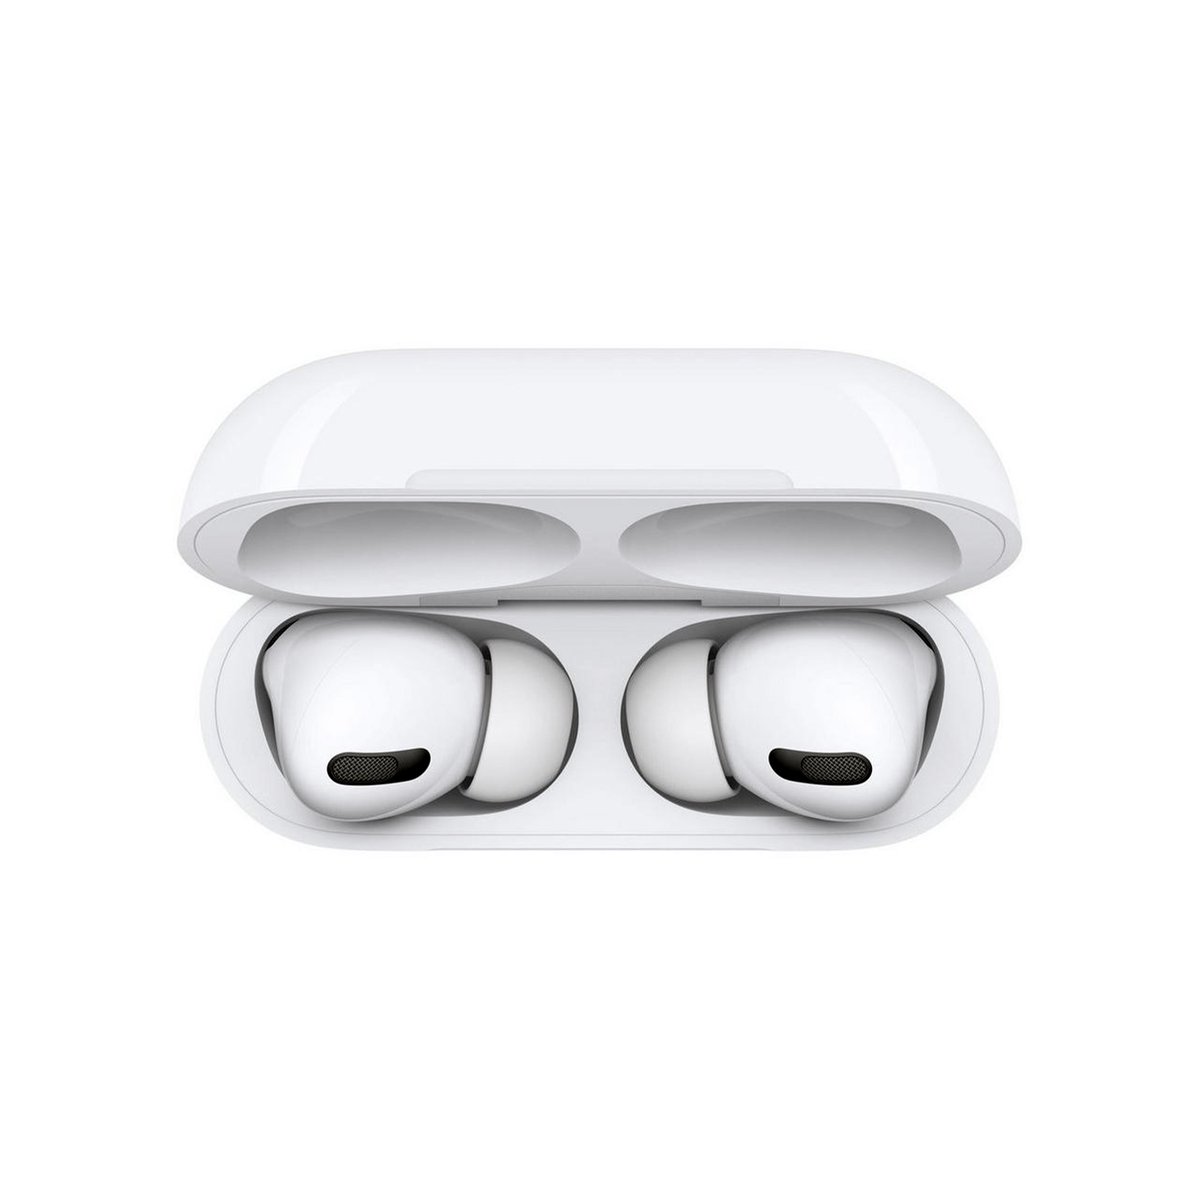 Apple AirPods Pro (MLWK3ZE),with MagSafe Case,White